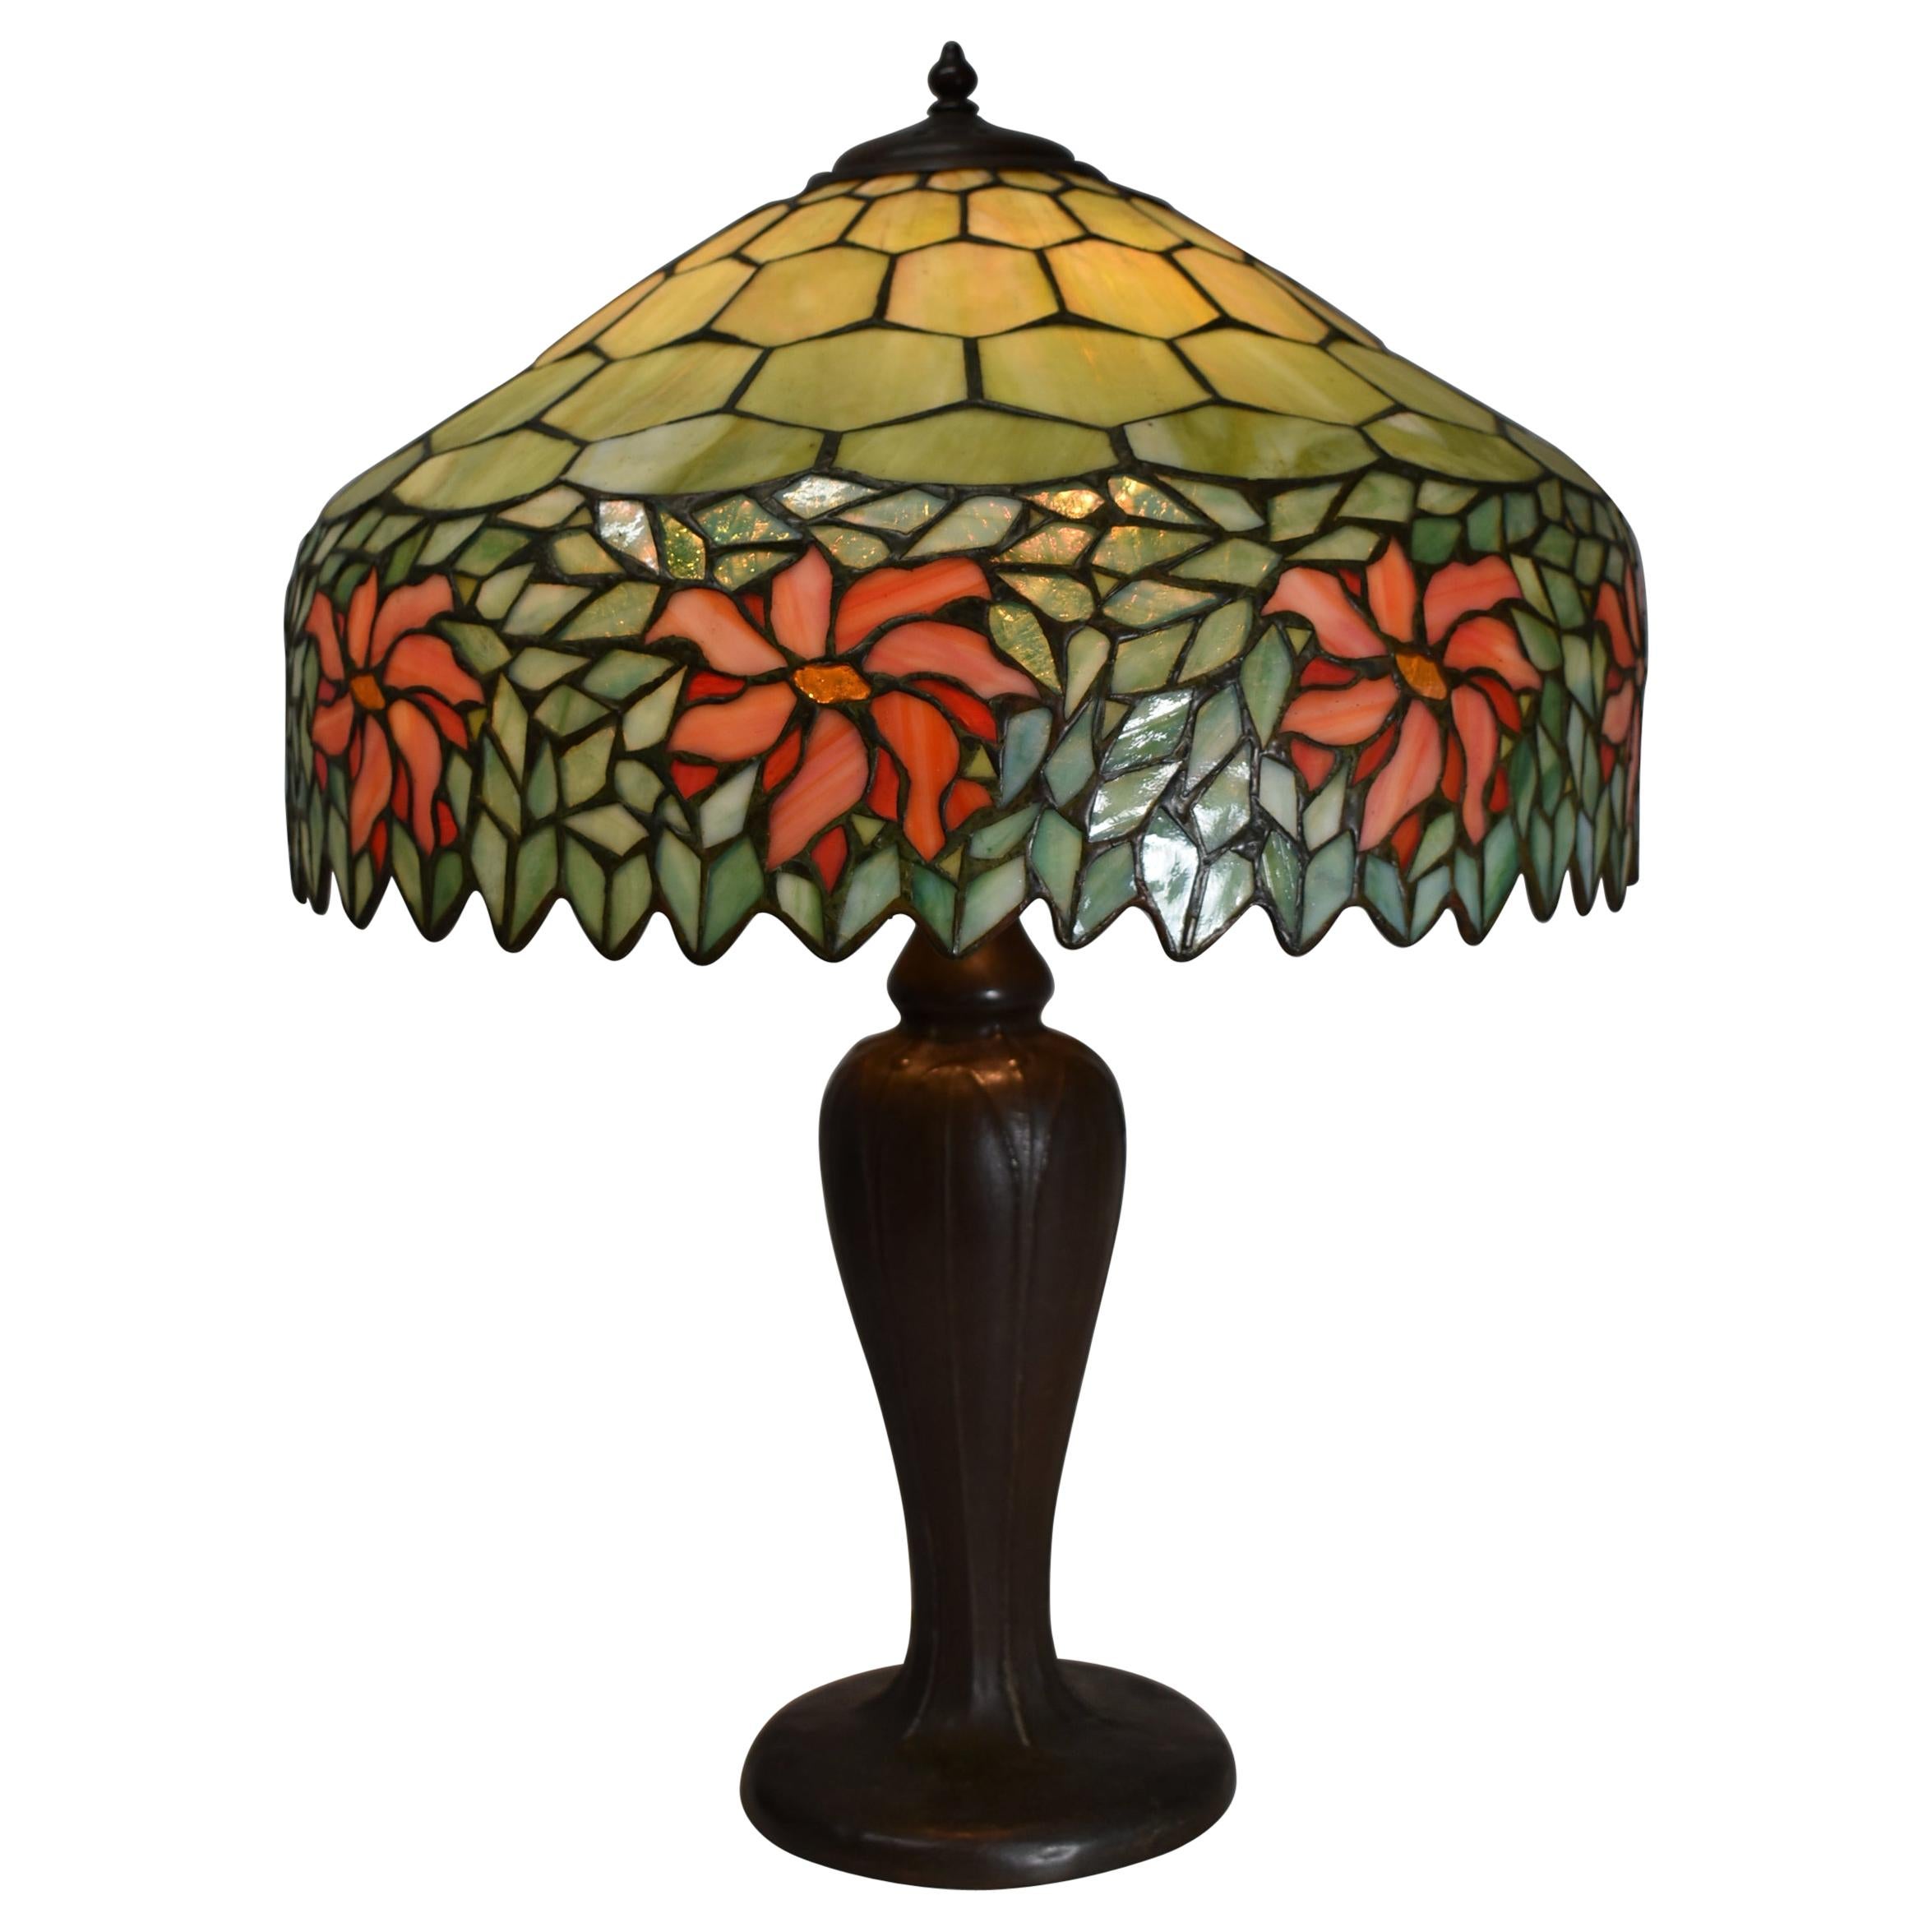 Antique Handel Leaded Stained Glass Table Lamp Poinsettia Designs